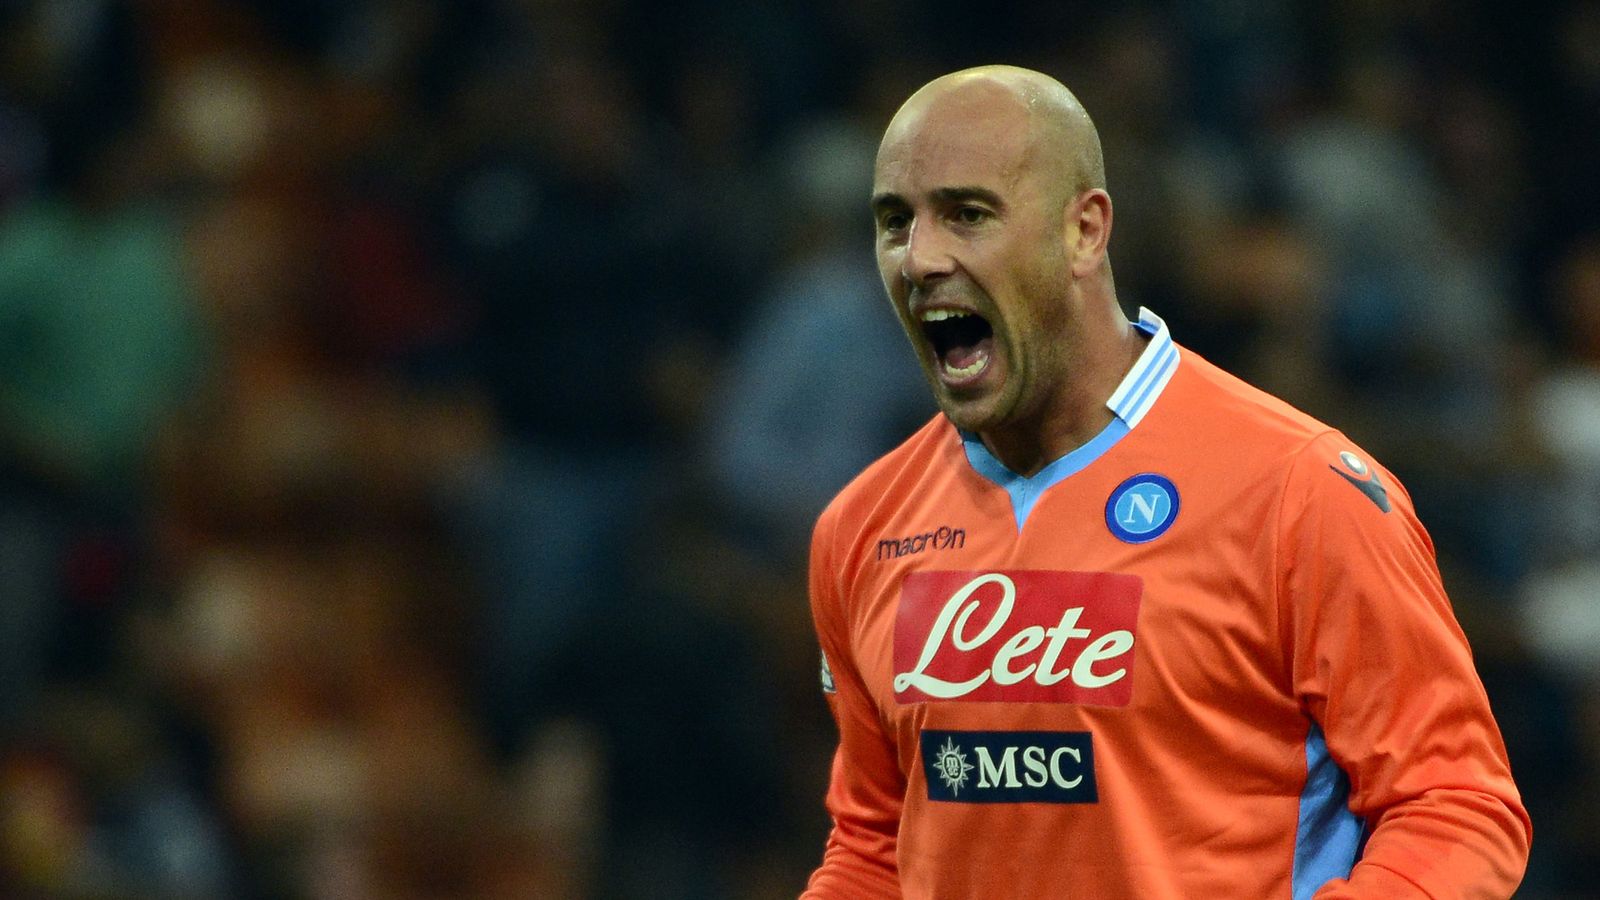  Pepe Reina reacts in anger after making a mistake that led to a goal for Everton in 2006.